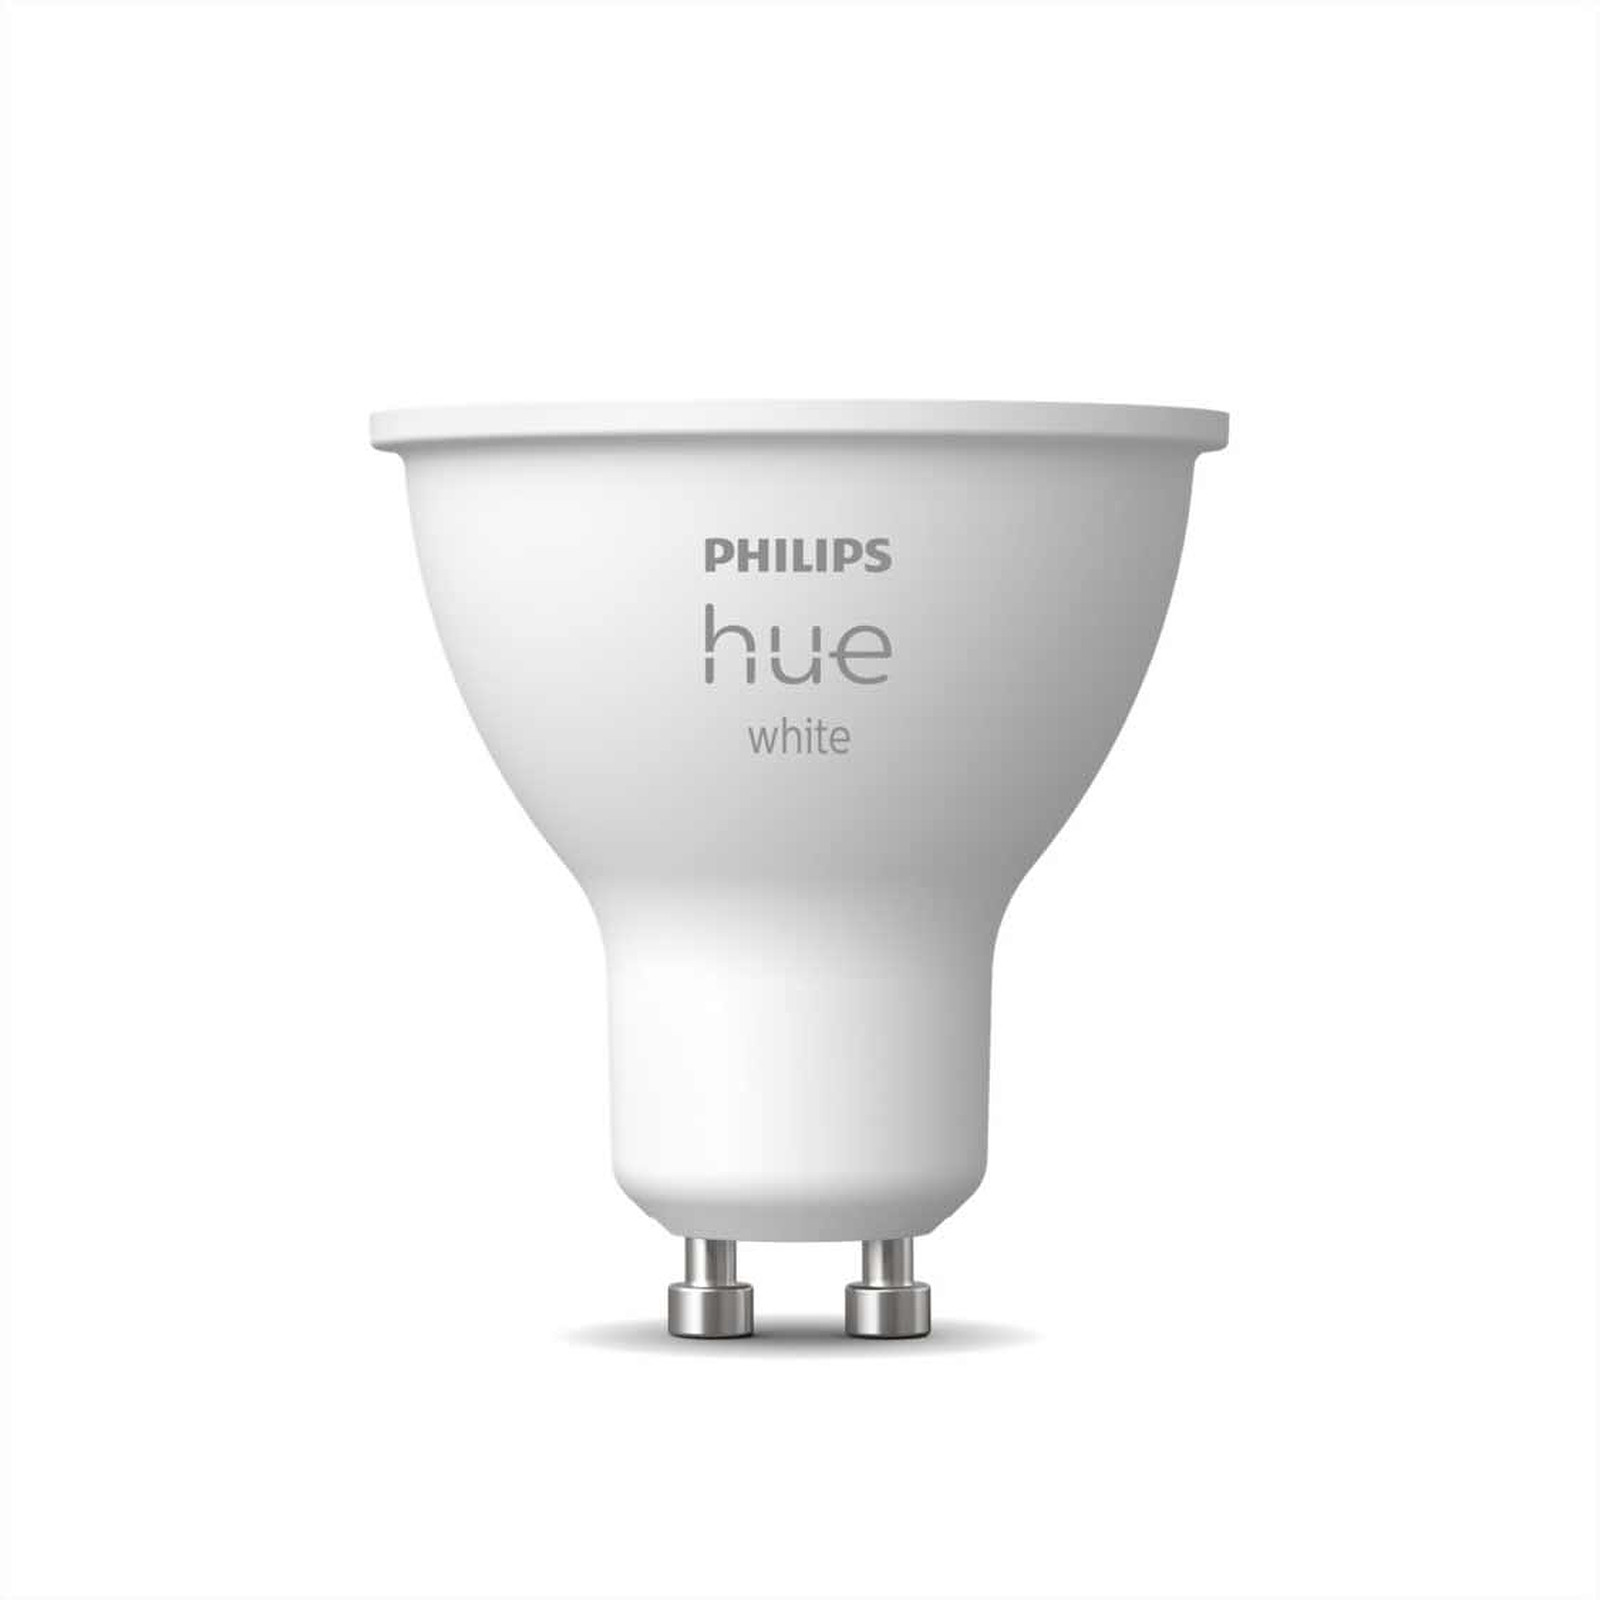 Philips Hue White GU10 5.5 W Bluetooth x 1 - Ampoule connectee Philips